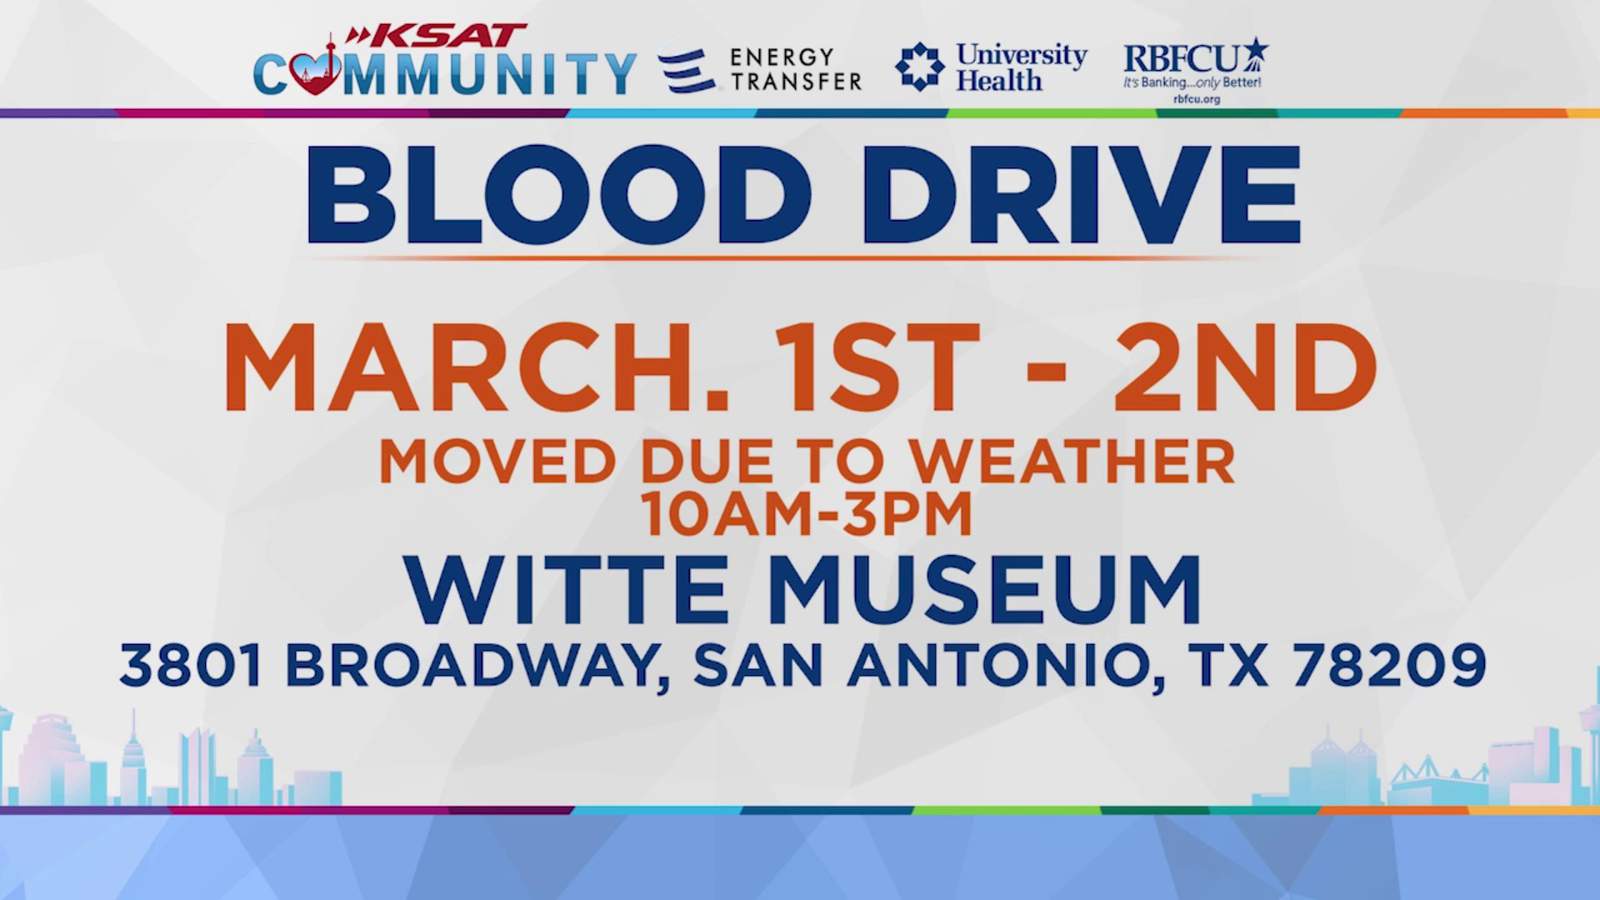 KSAT Community blood drive with University Health moved to March 1-2 due to inclement weather